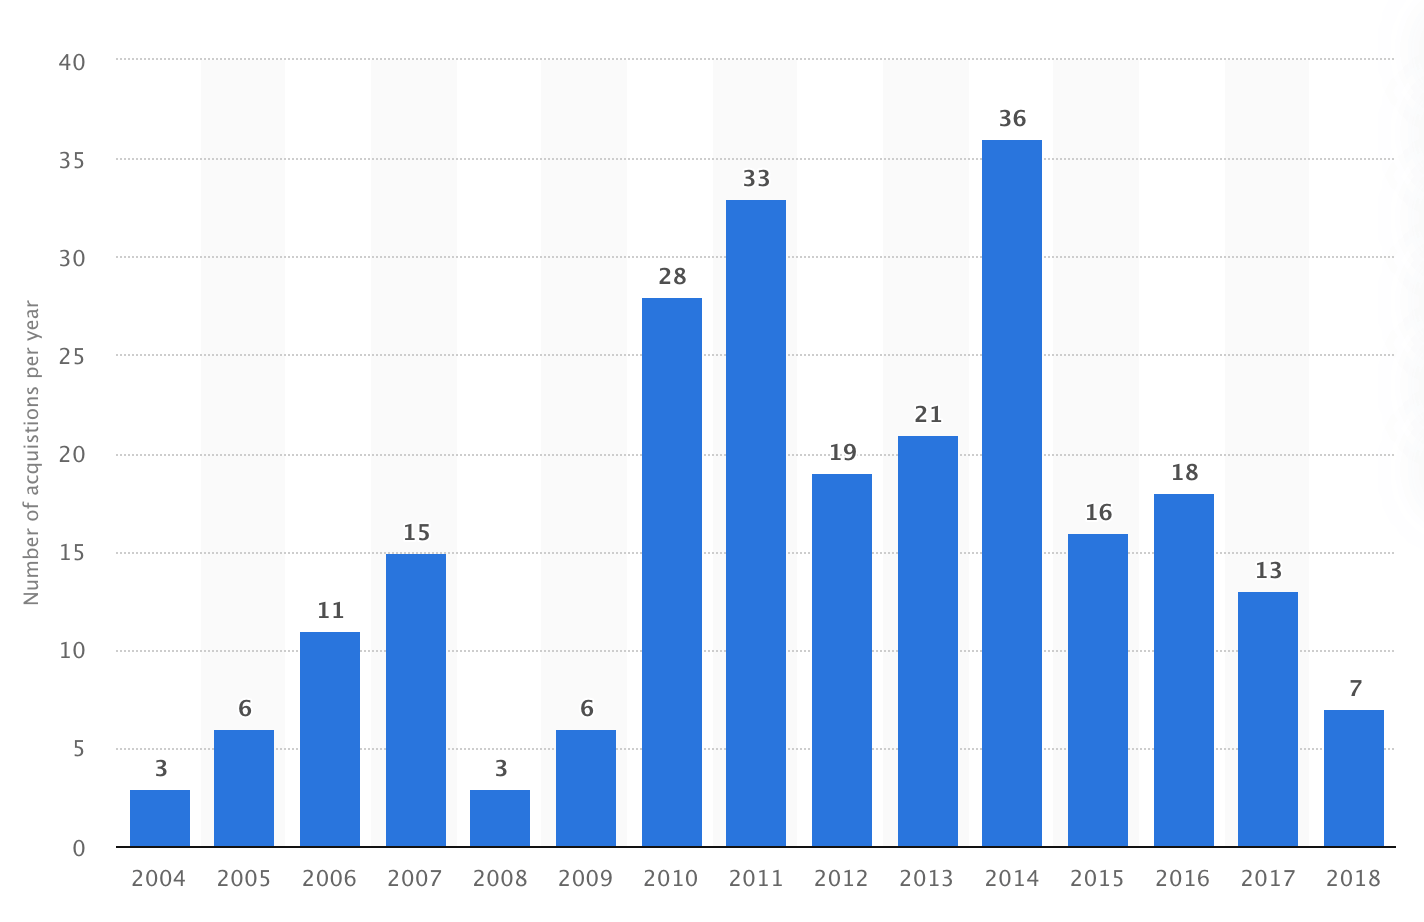 Number of Google acquisitions